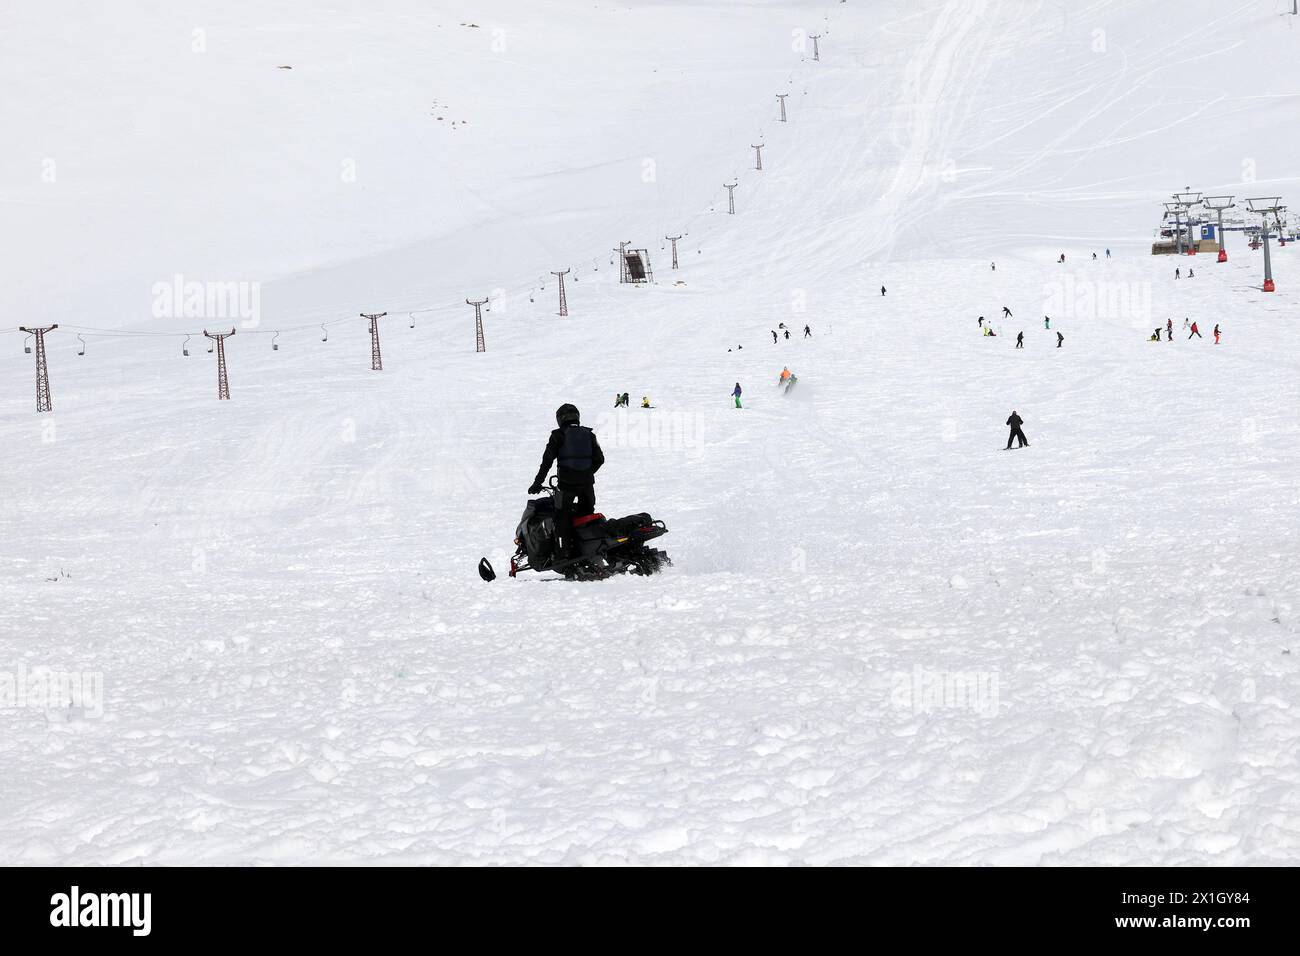 A man riding a skidoo in the snowy slopes of Lebanon. Stock Photo